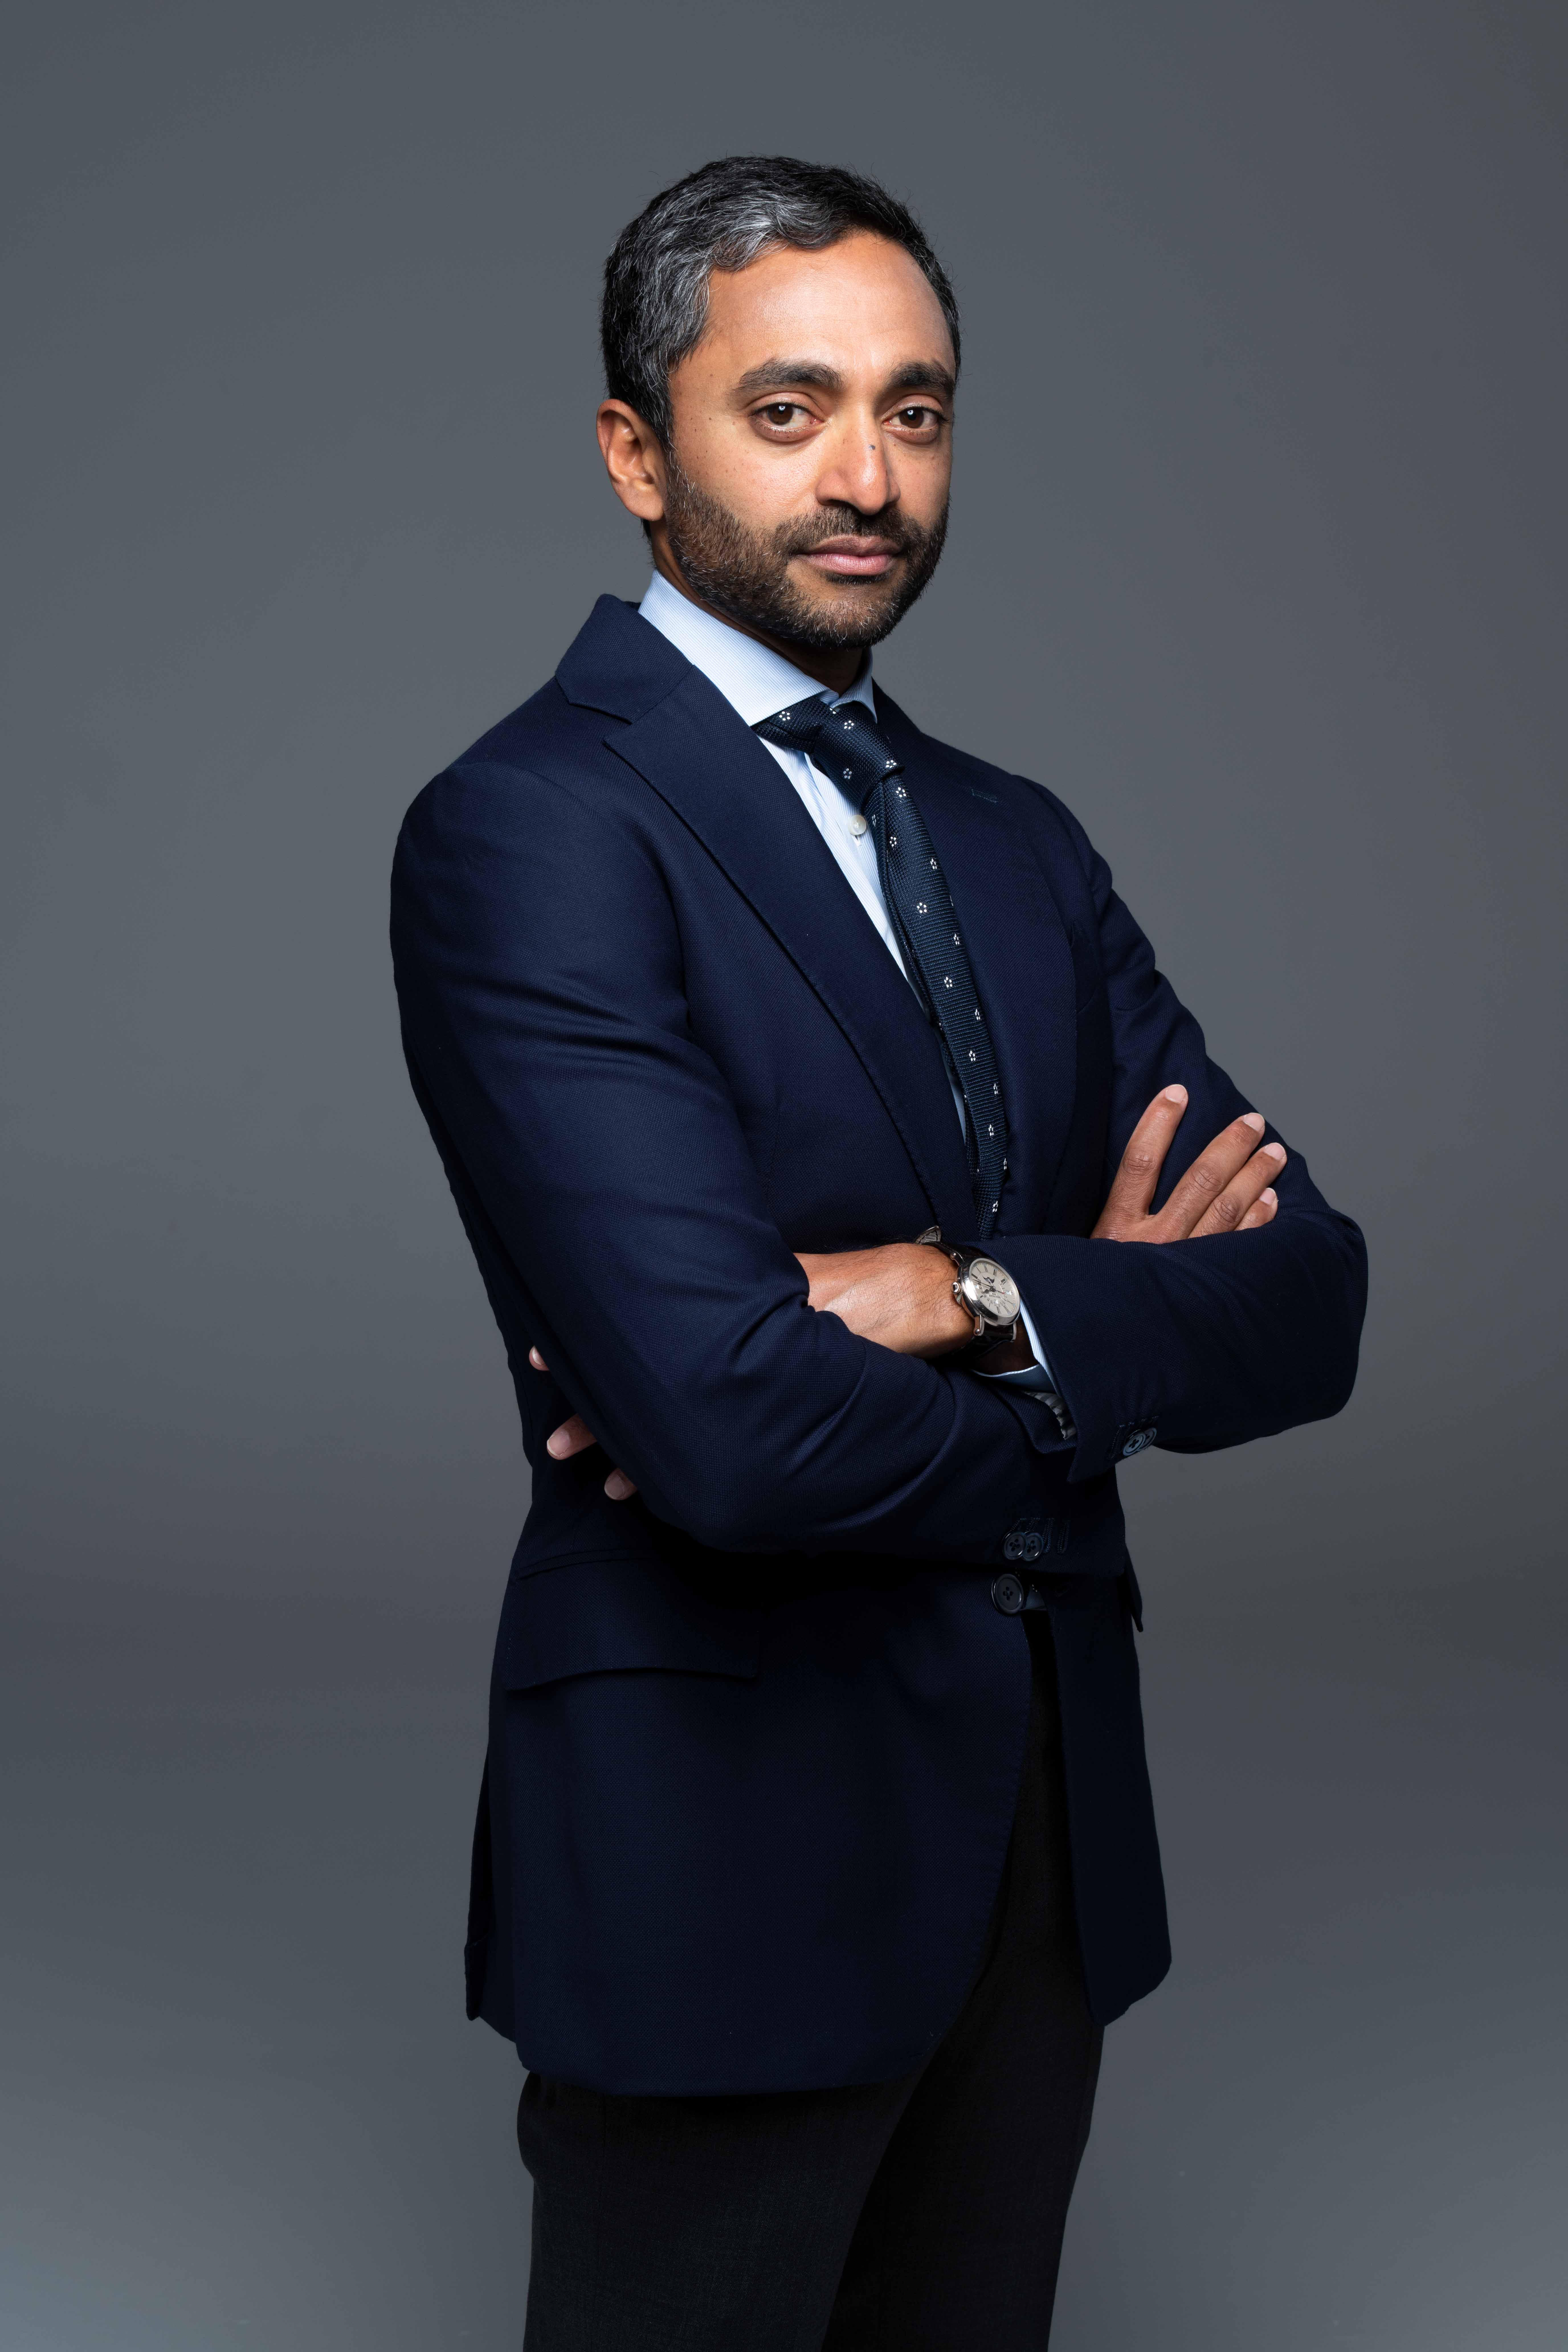 billionaire-chamath-predicts-this-crypto-sector-will-transform-all-financial-assets